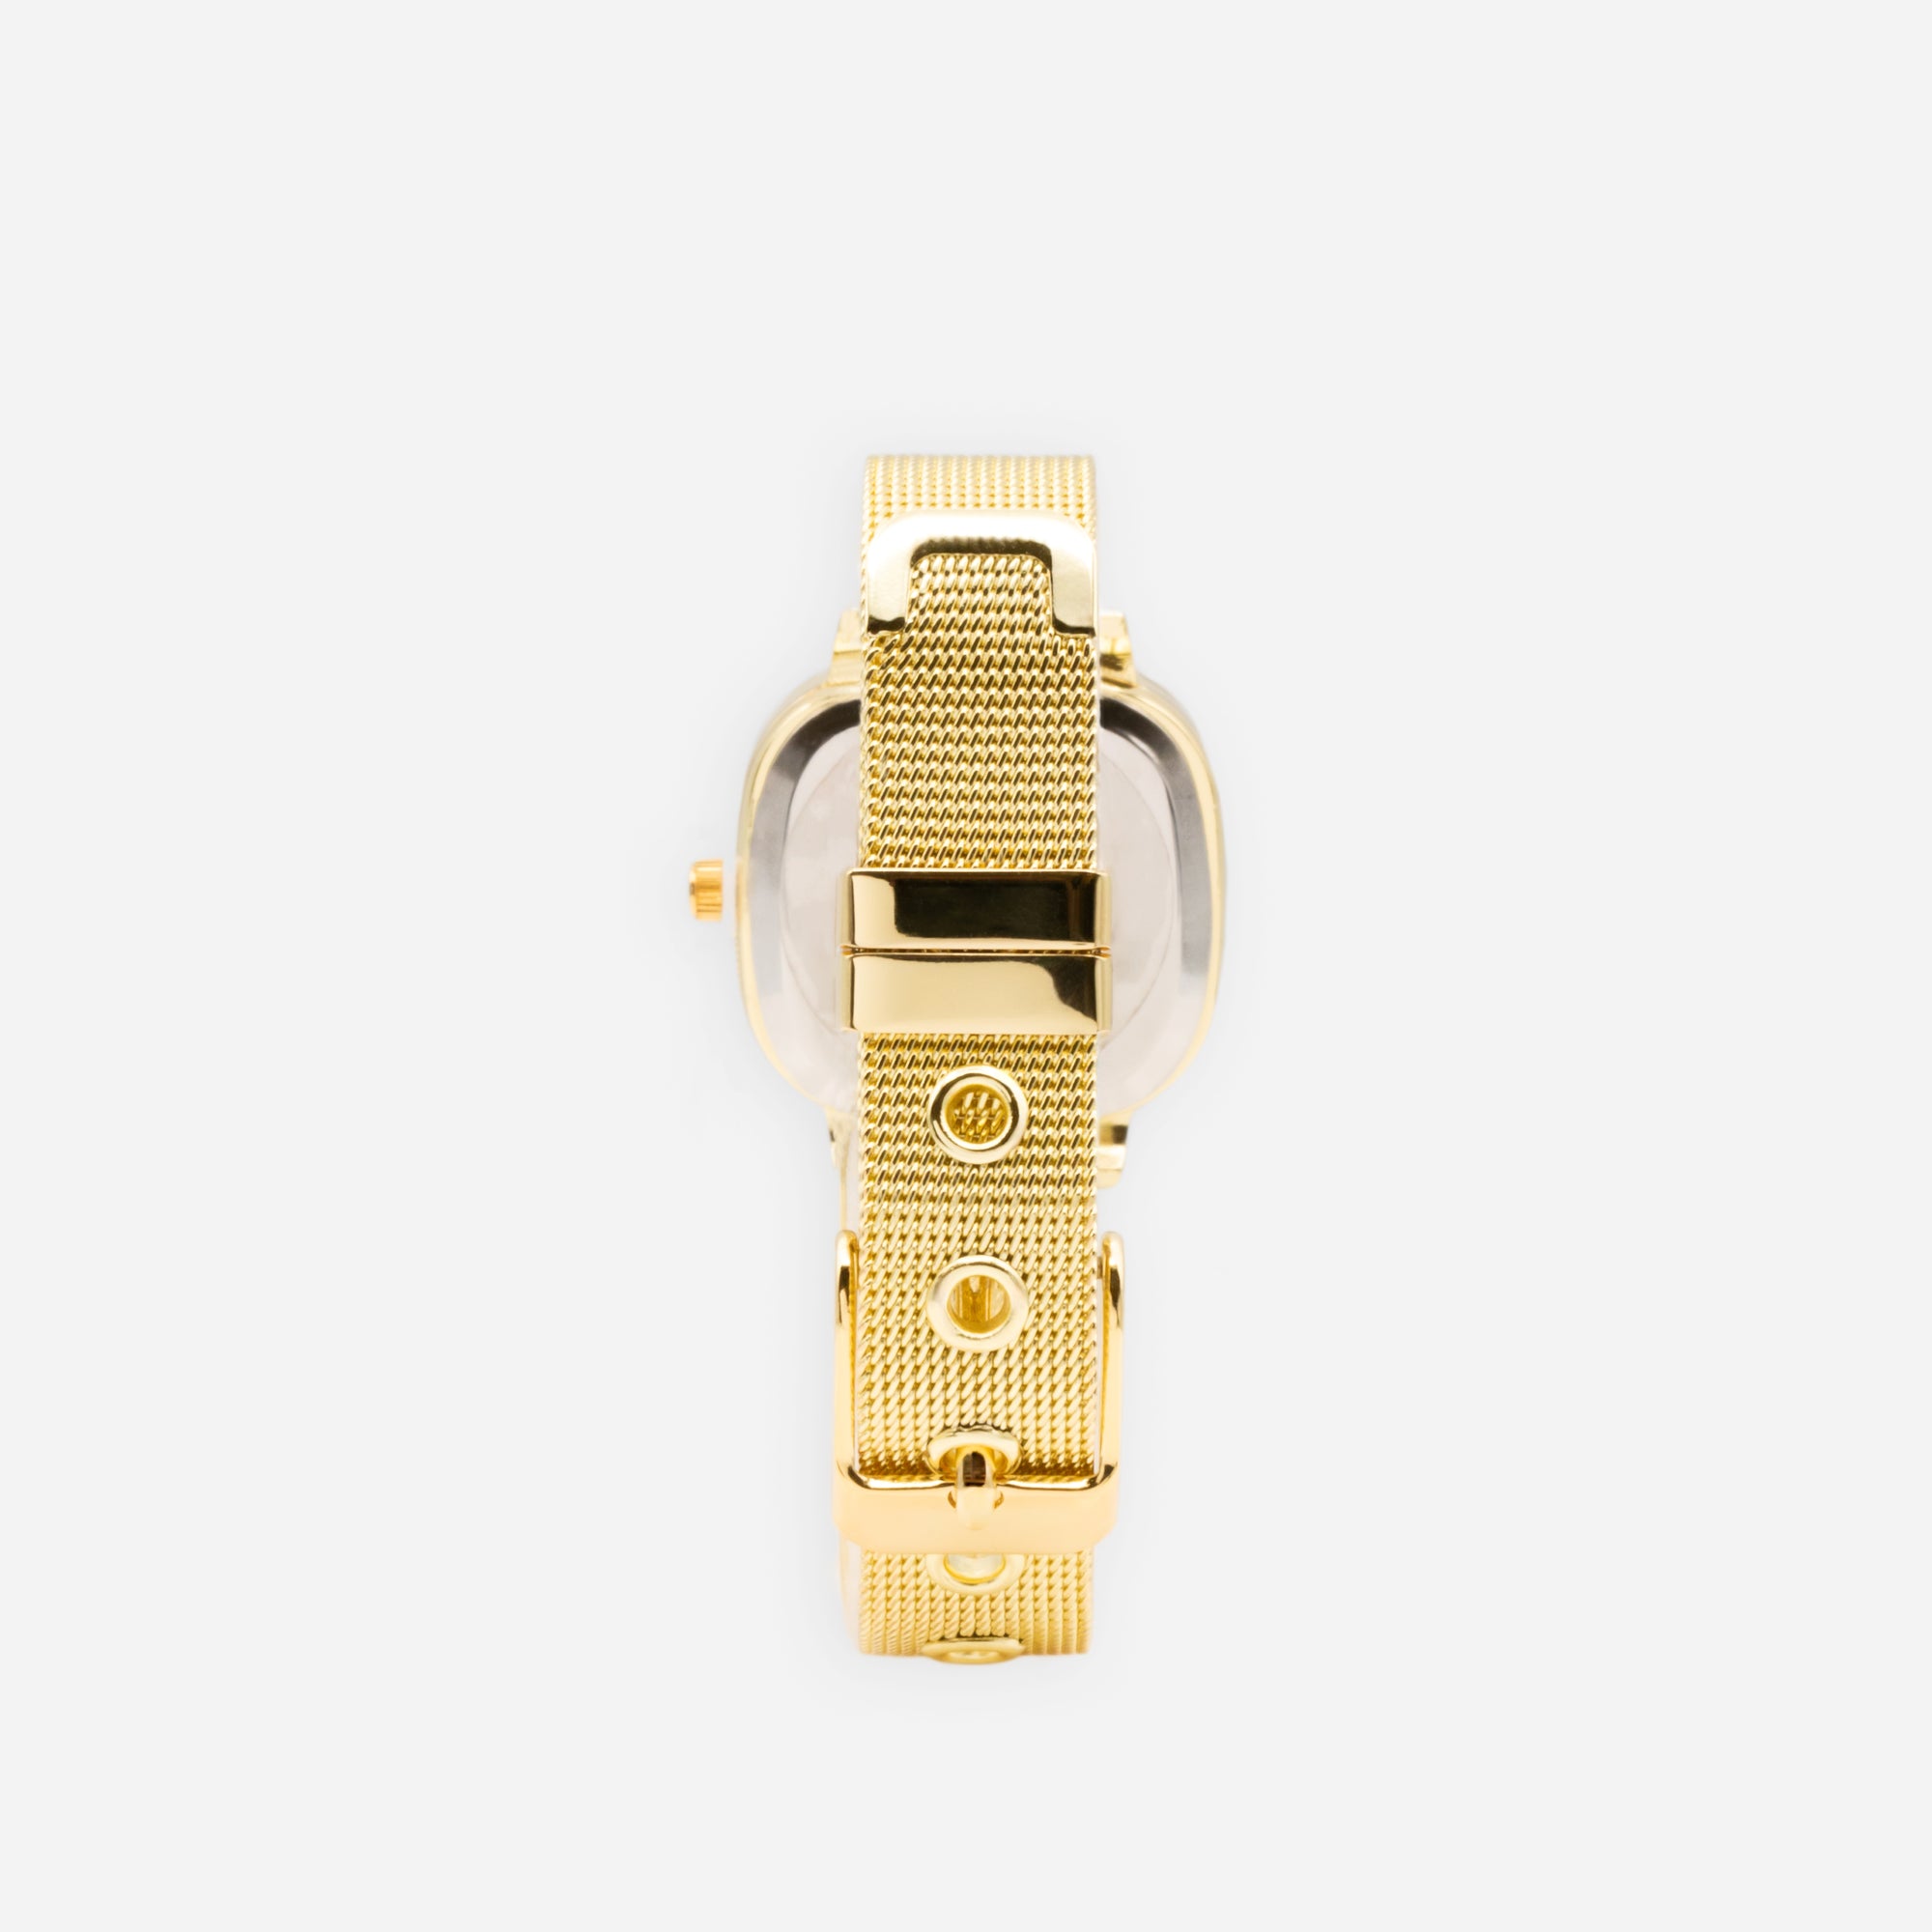 Gold watch with white dial